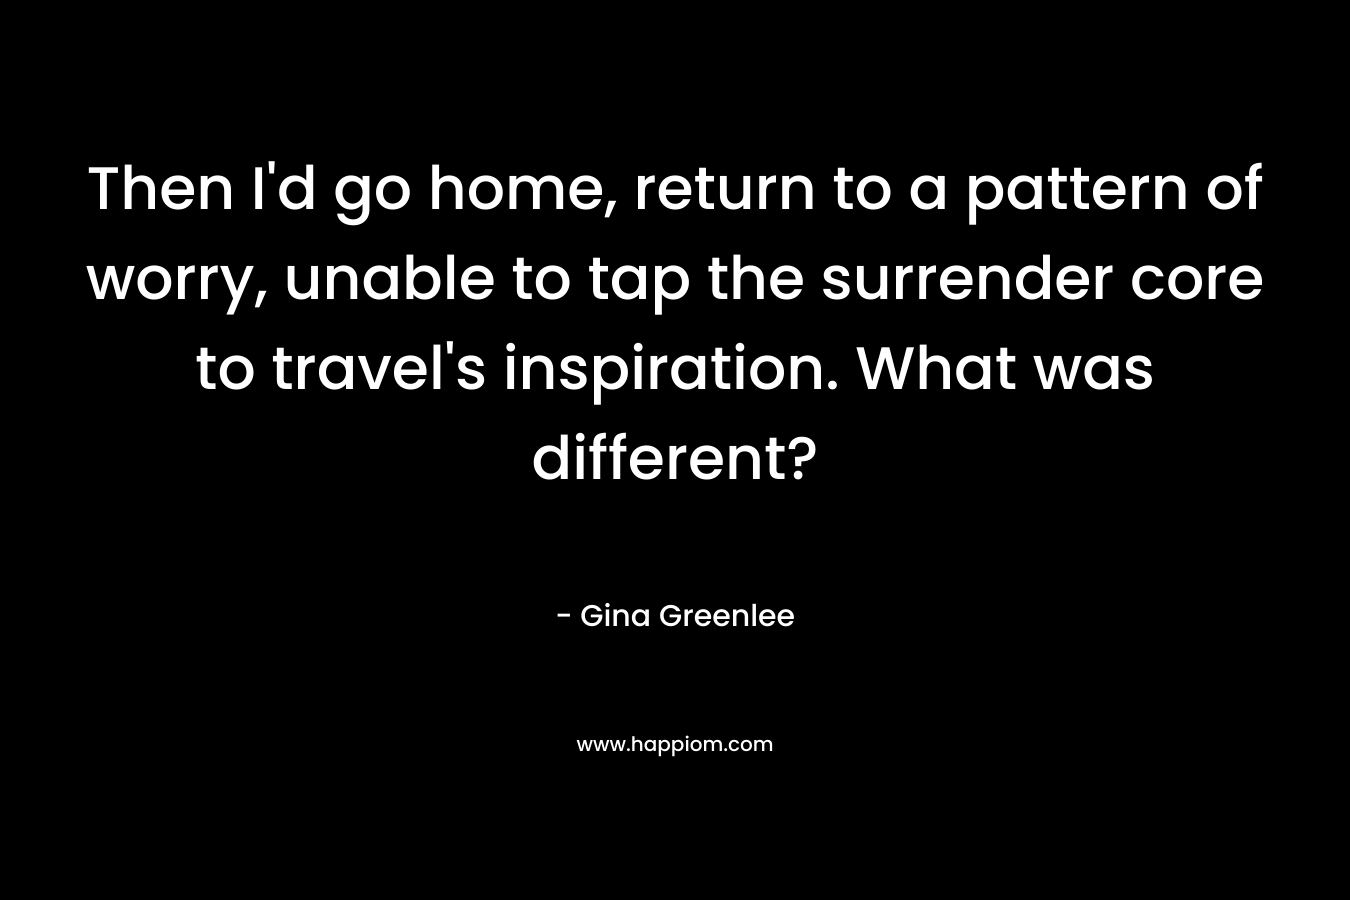 Then I’d go home, return to a pattern of worry, unable to tap the surrender core to travel’s inspiration. What was different? – Gina Greenlee